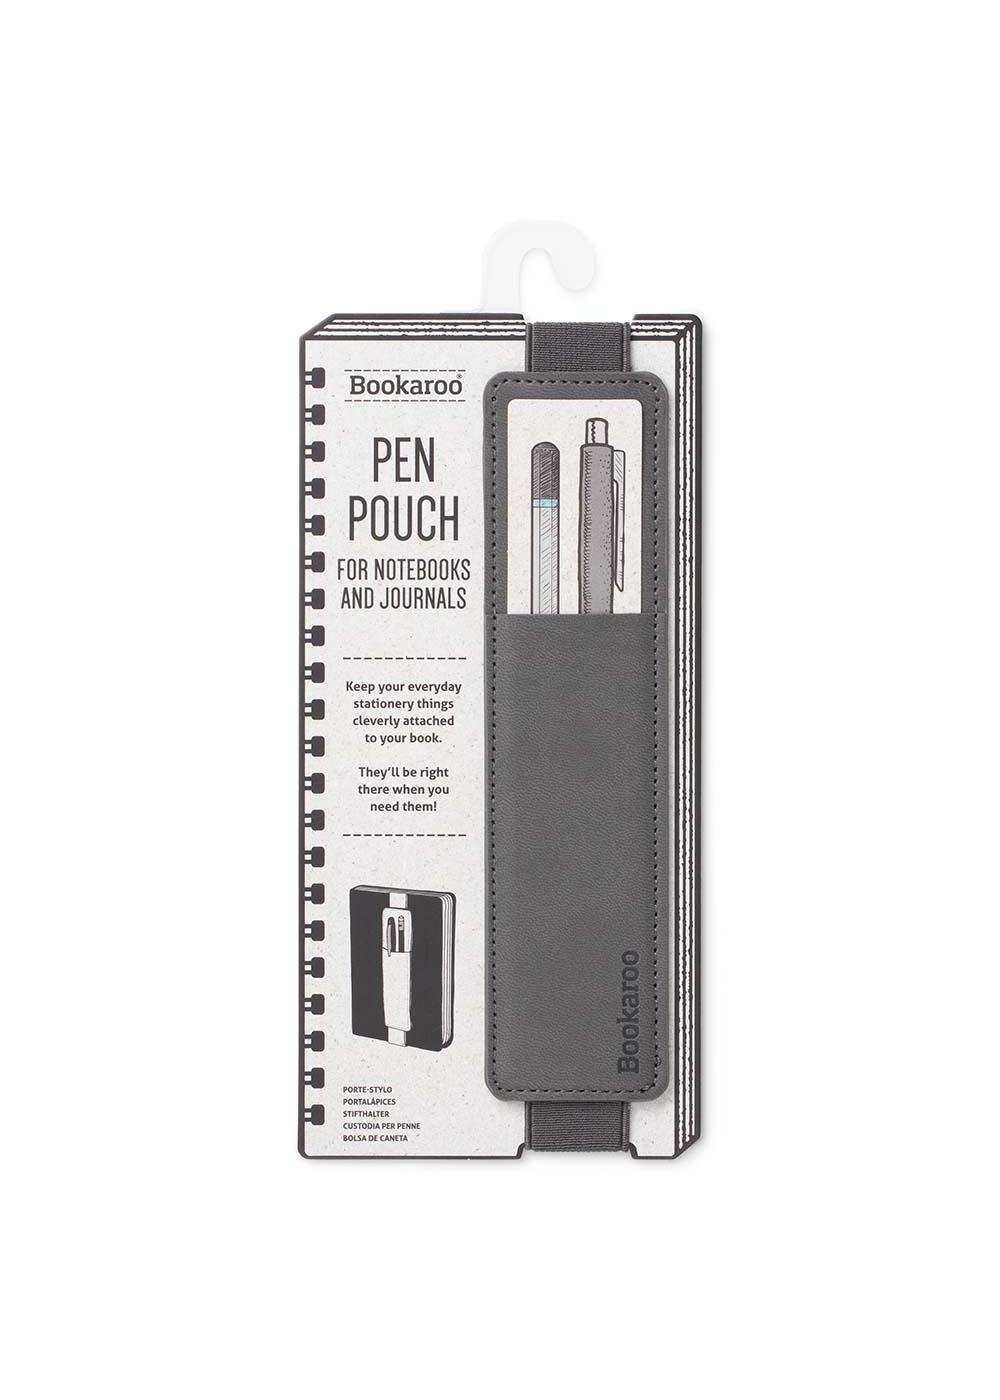 Bookaroo Pen Pouch for Notebook & Journal - Charcoal; image 1 of 2